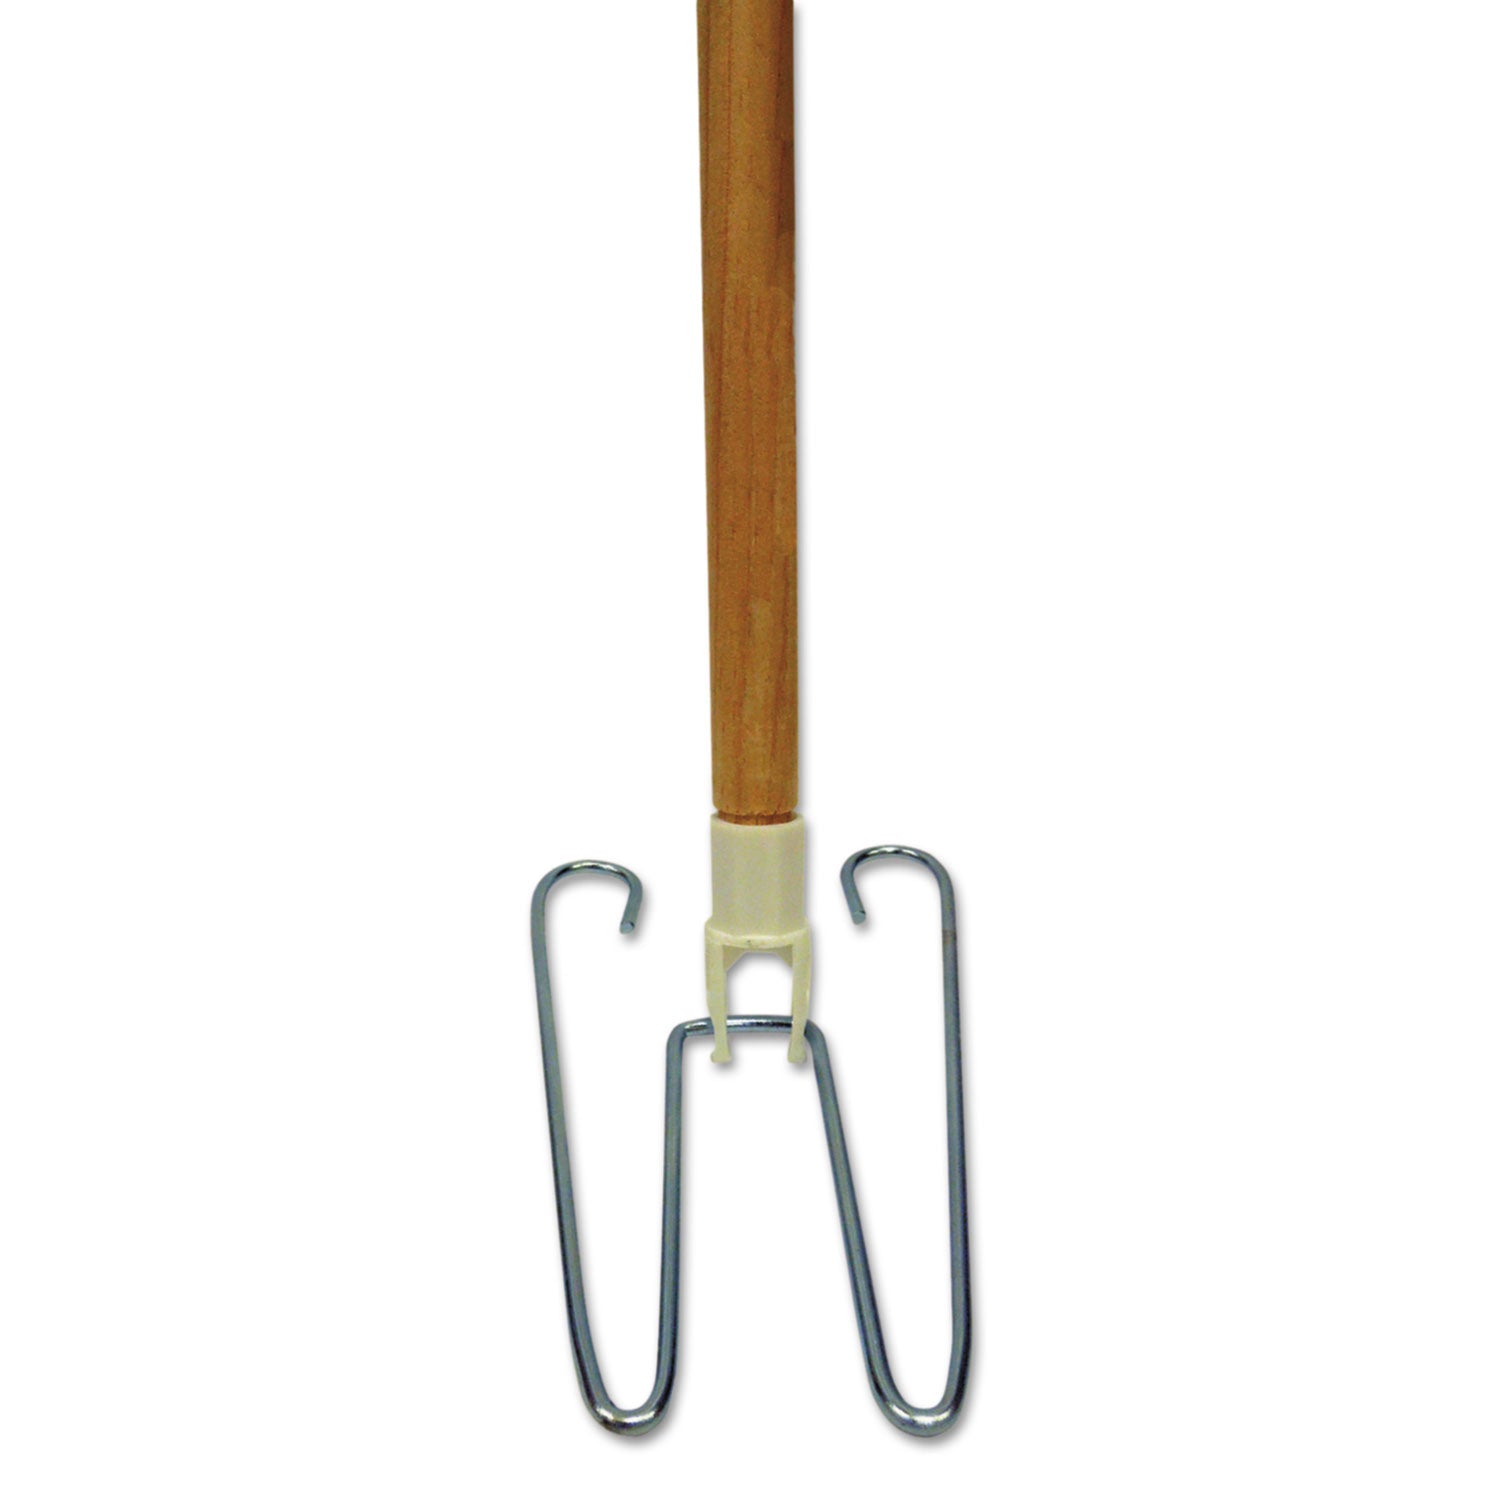 wedge-dust-mop-head-frame-lacquered-wood-handle-094-dia-x-48-length-natural_bwk1492 - 1